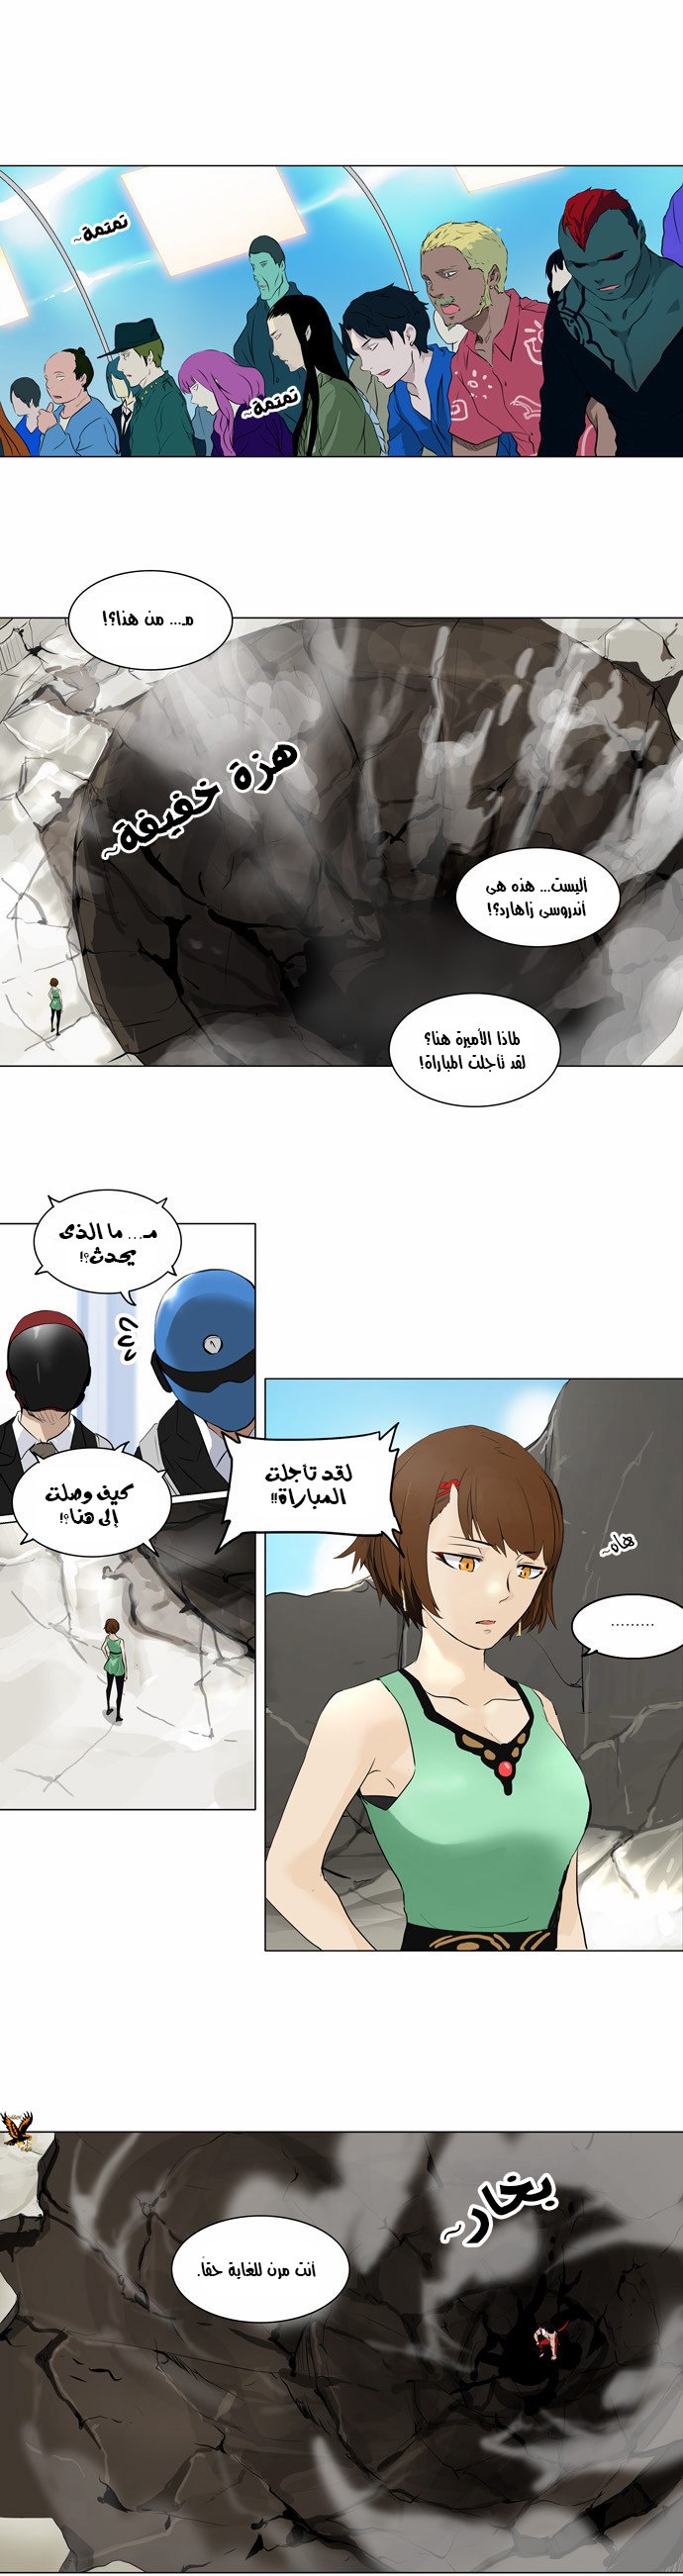 Tower of God 2: Chapter 105 - Page 1